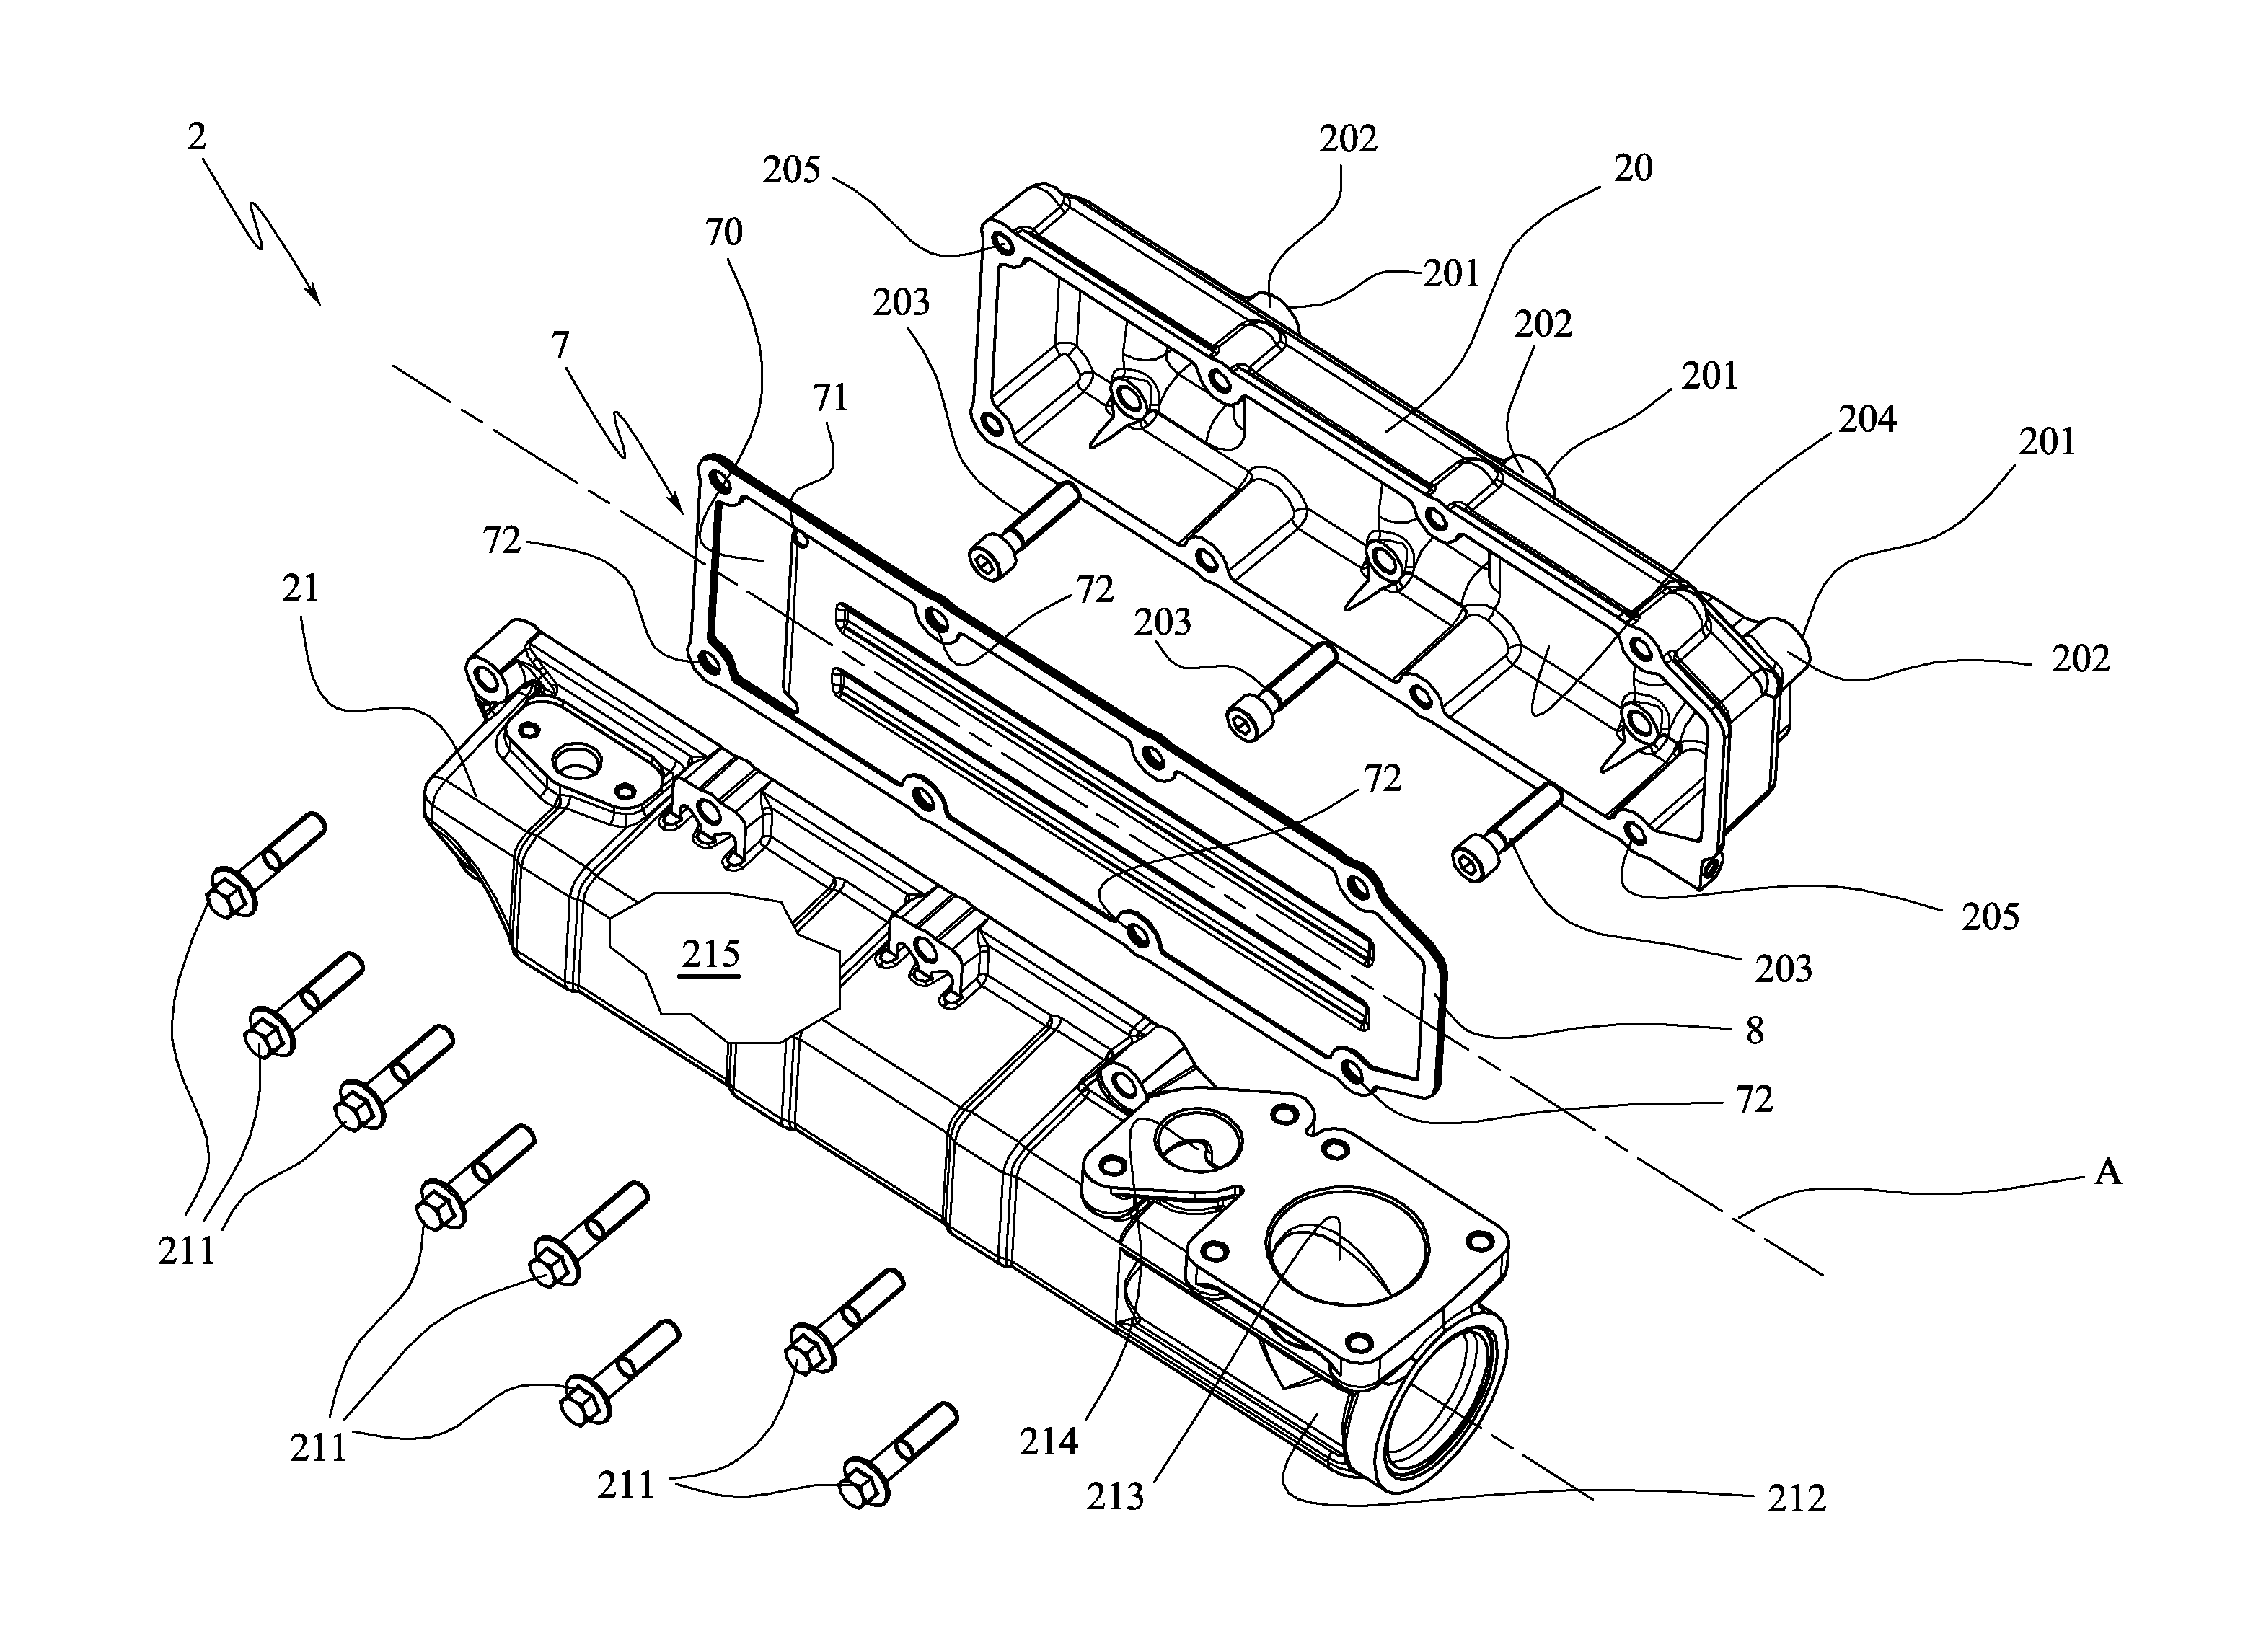 Intake manifold of comburent air for an internal combustion engine equipped with egr